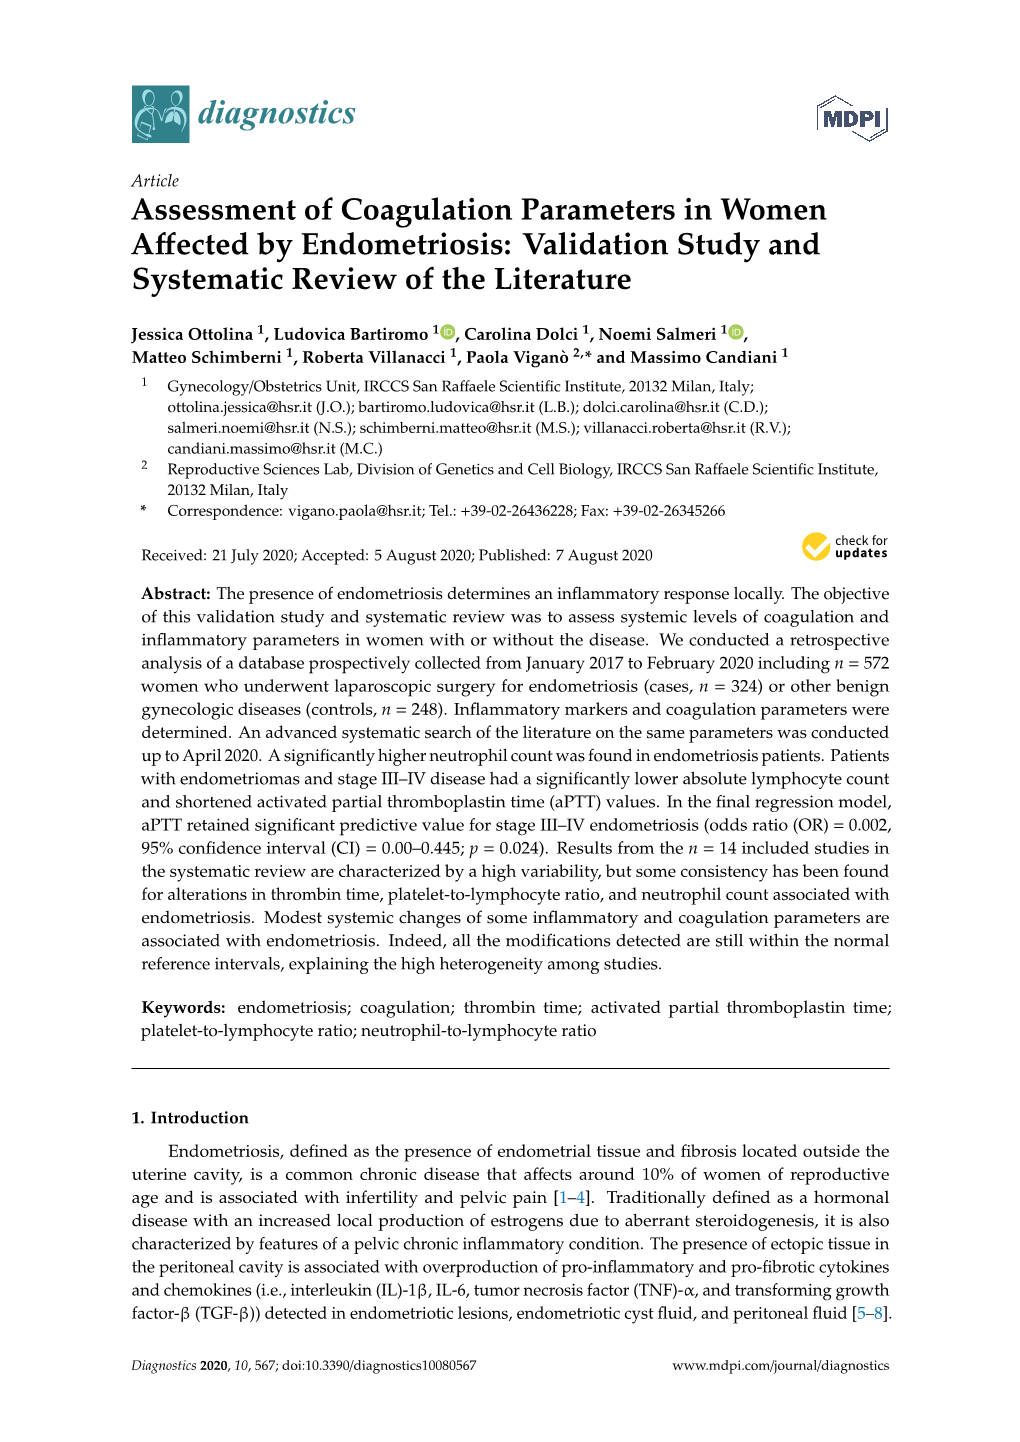 Assessment of Coagulation Parameters in Women Aﬀected by Endometriosis: Validation Study and Systematic Review of the Literature